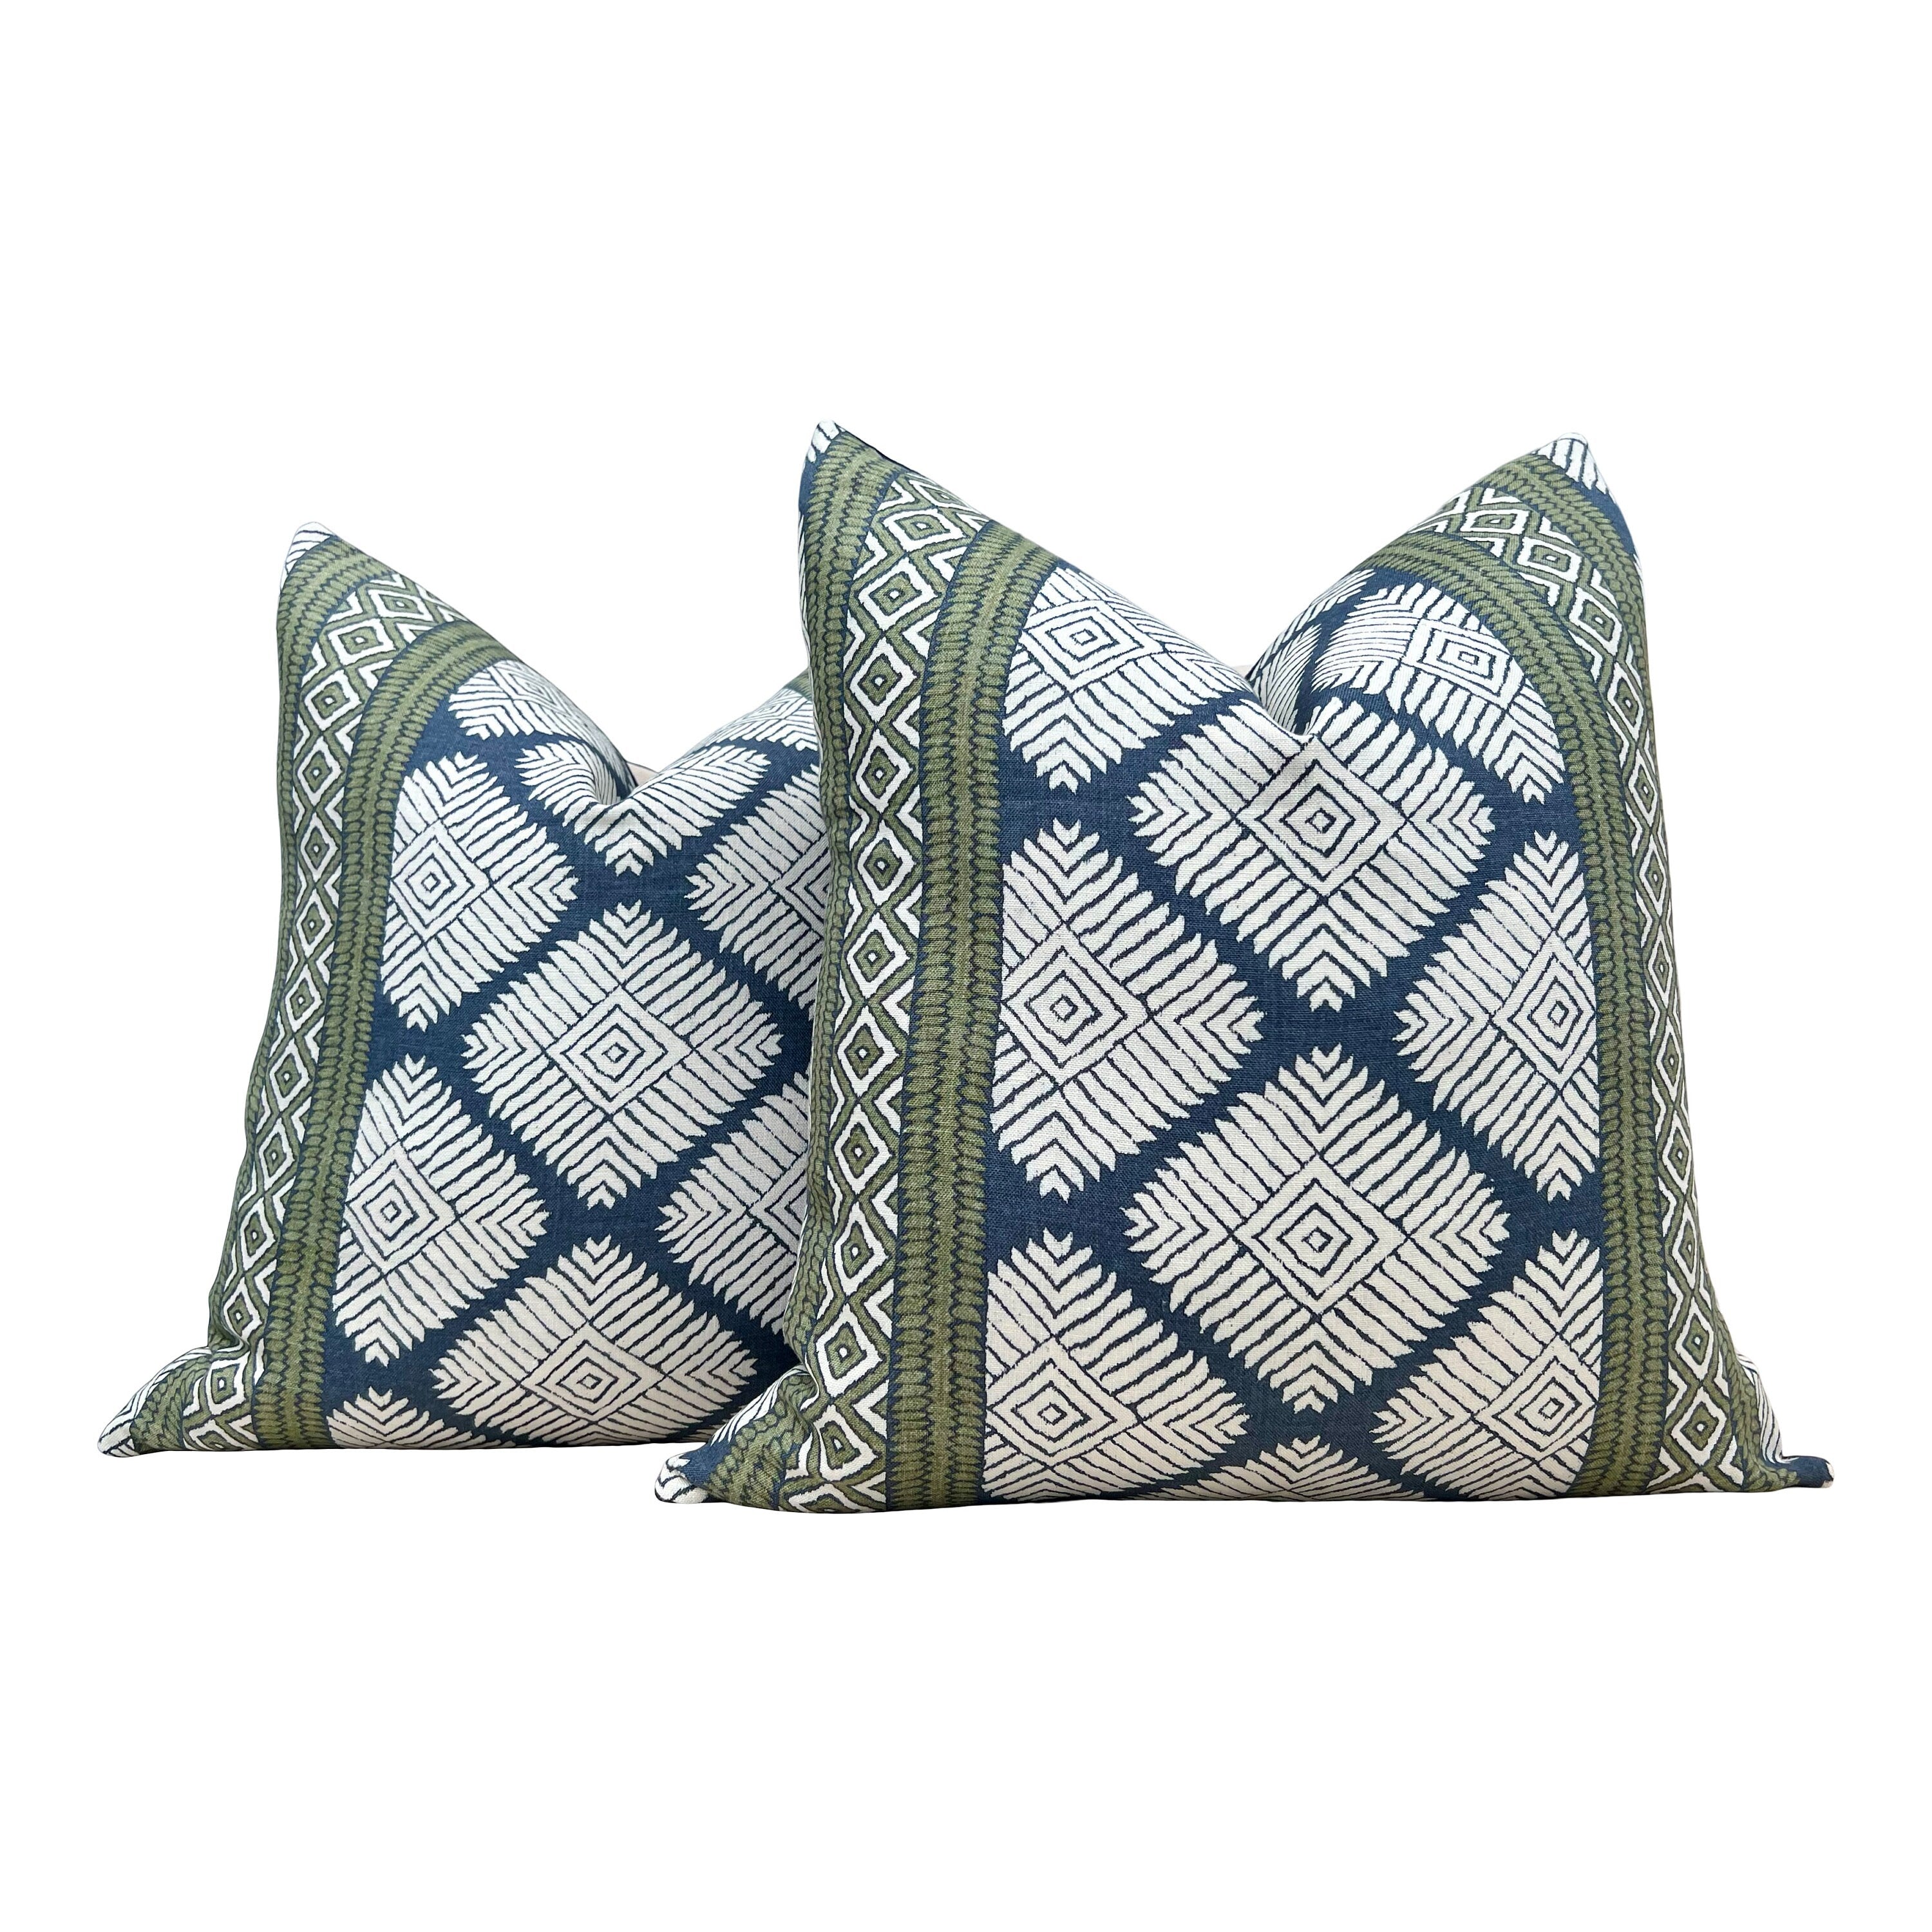 Striped Pillow in Navy Blue and Green. Designer Decorative Coastal Pillow Cover in Green and Blue, Geometric Diamond Accent Pillow Cover